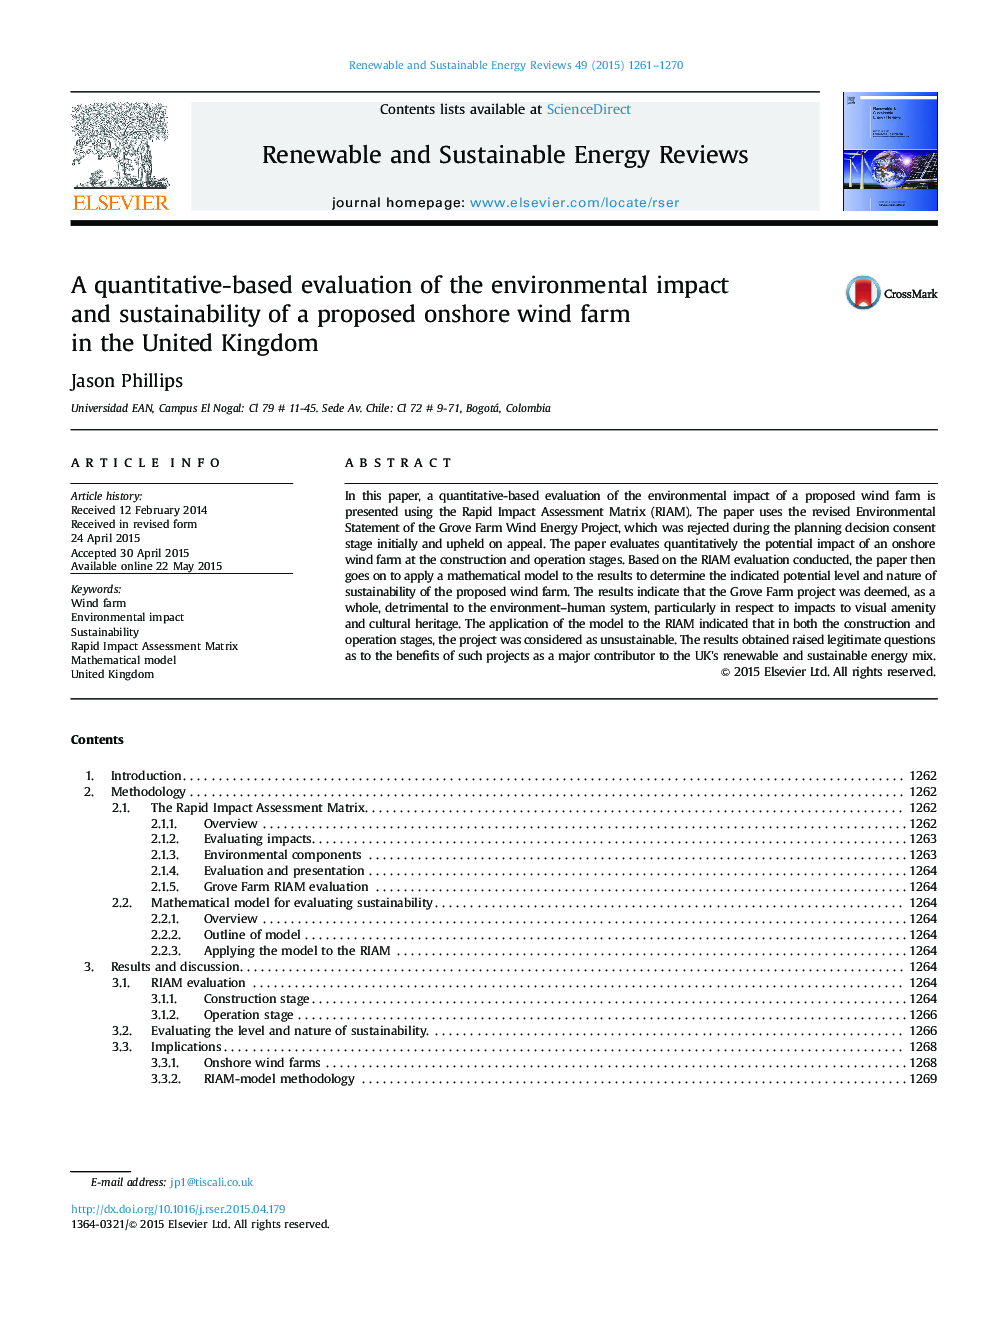 A quantitative-based evaluation of the environmental impact and sustainability of a proposed onshore wind farm in the United Kingdom